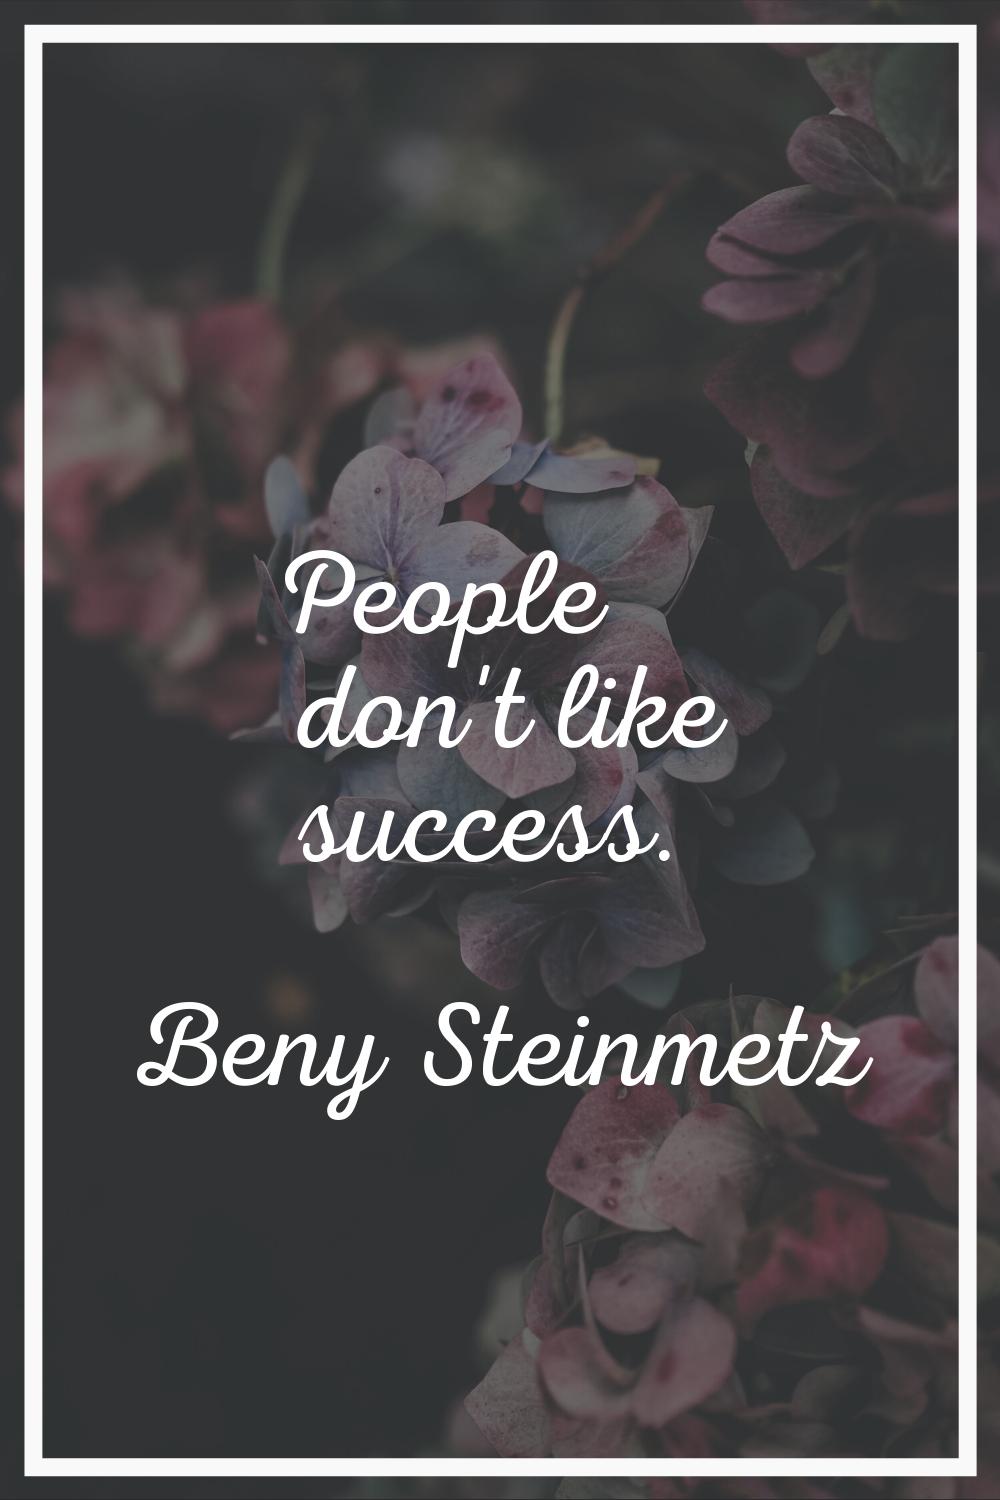 People don't like success.